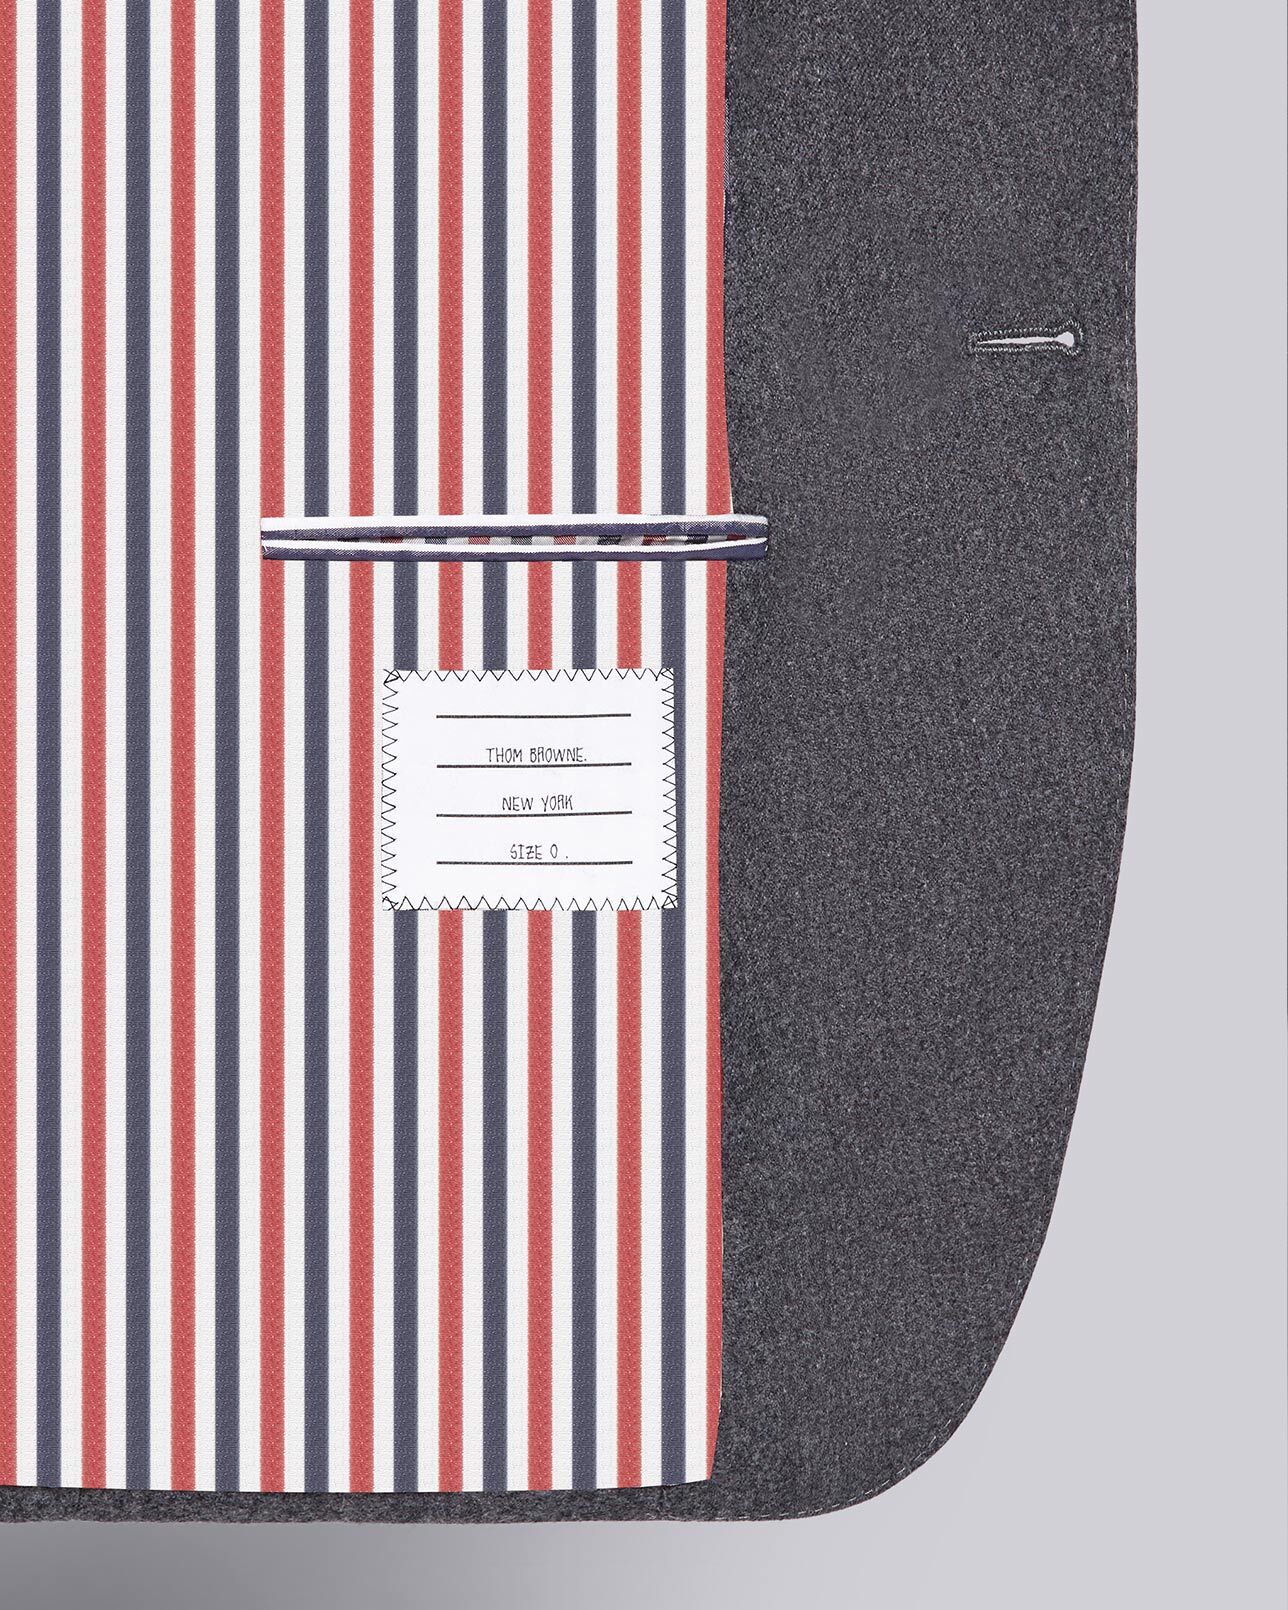 Discover Thom Browne Personalization and Customization.